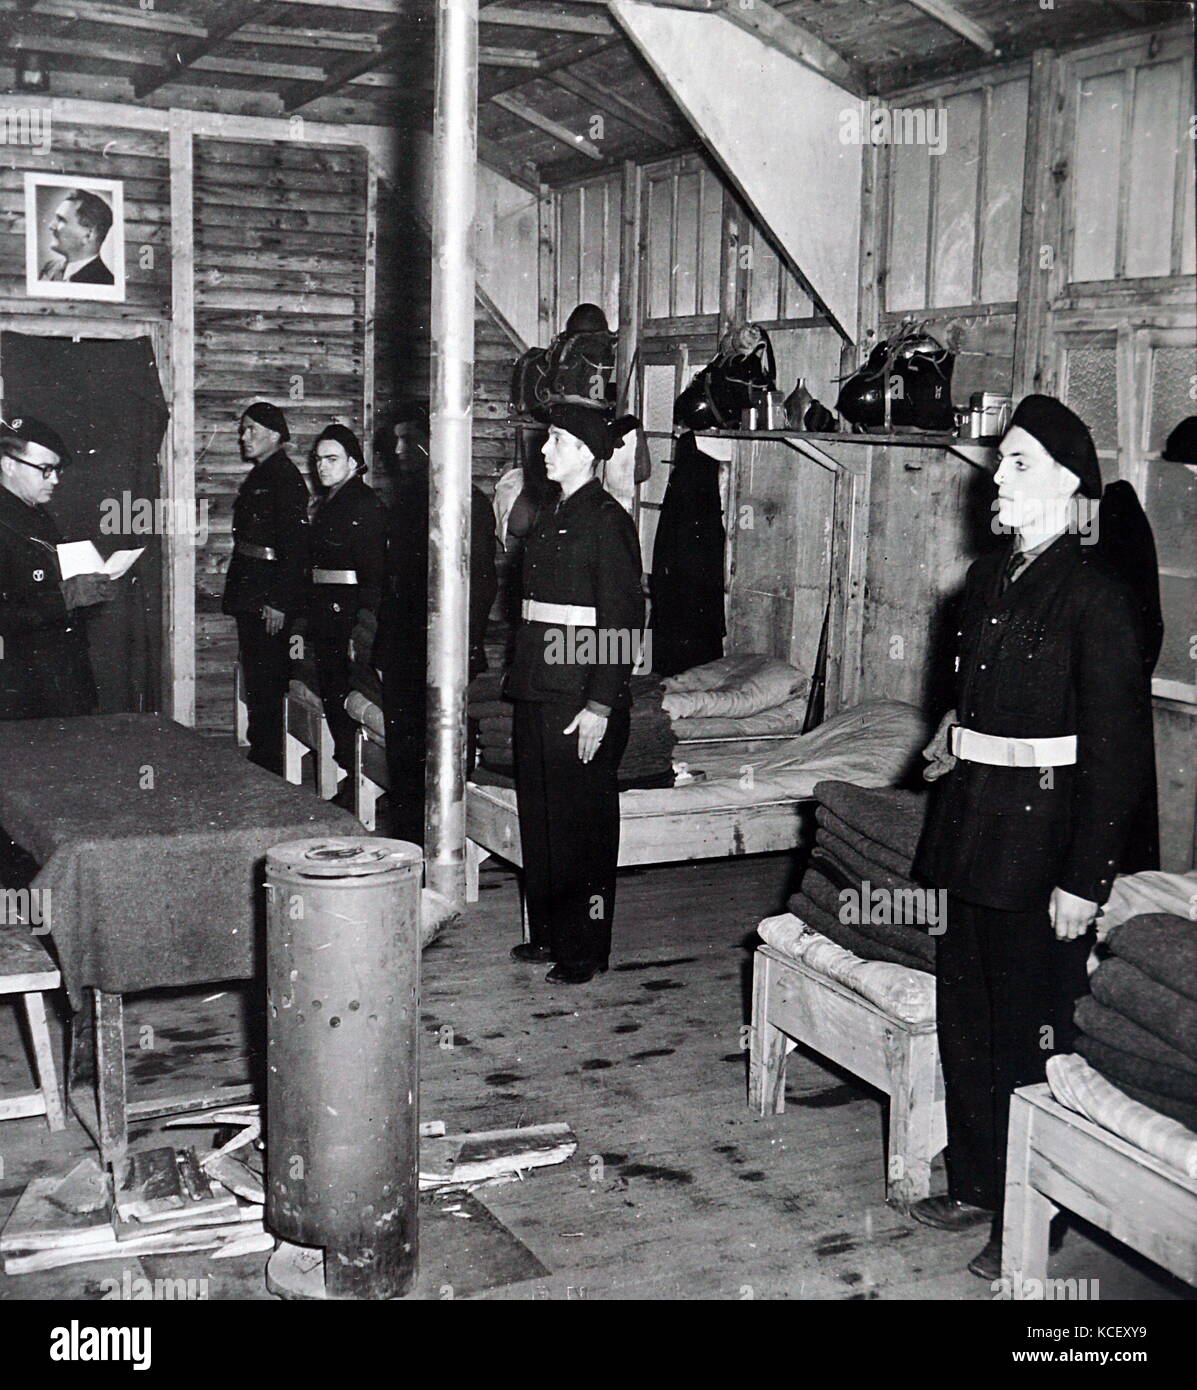 Photograph of French soldiers praying in their barracks in occupied France during World War Two. Dated 20th Century Stock Photo